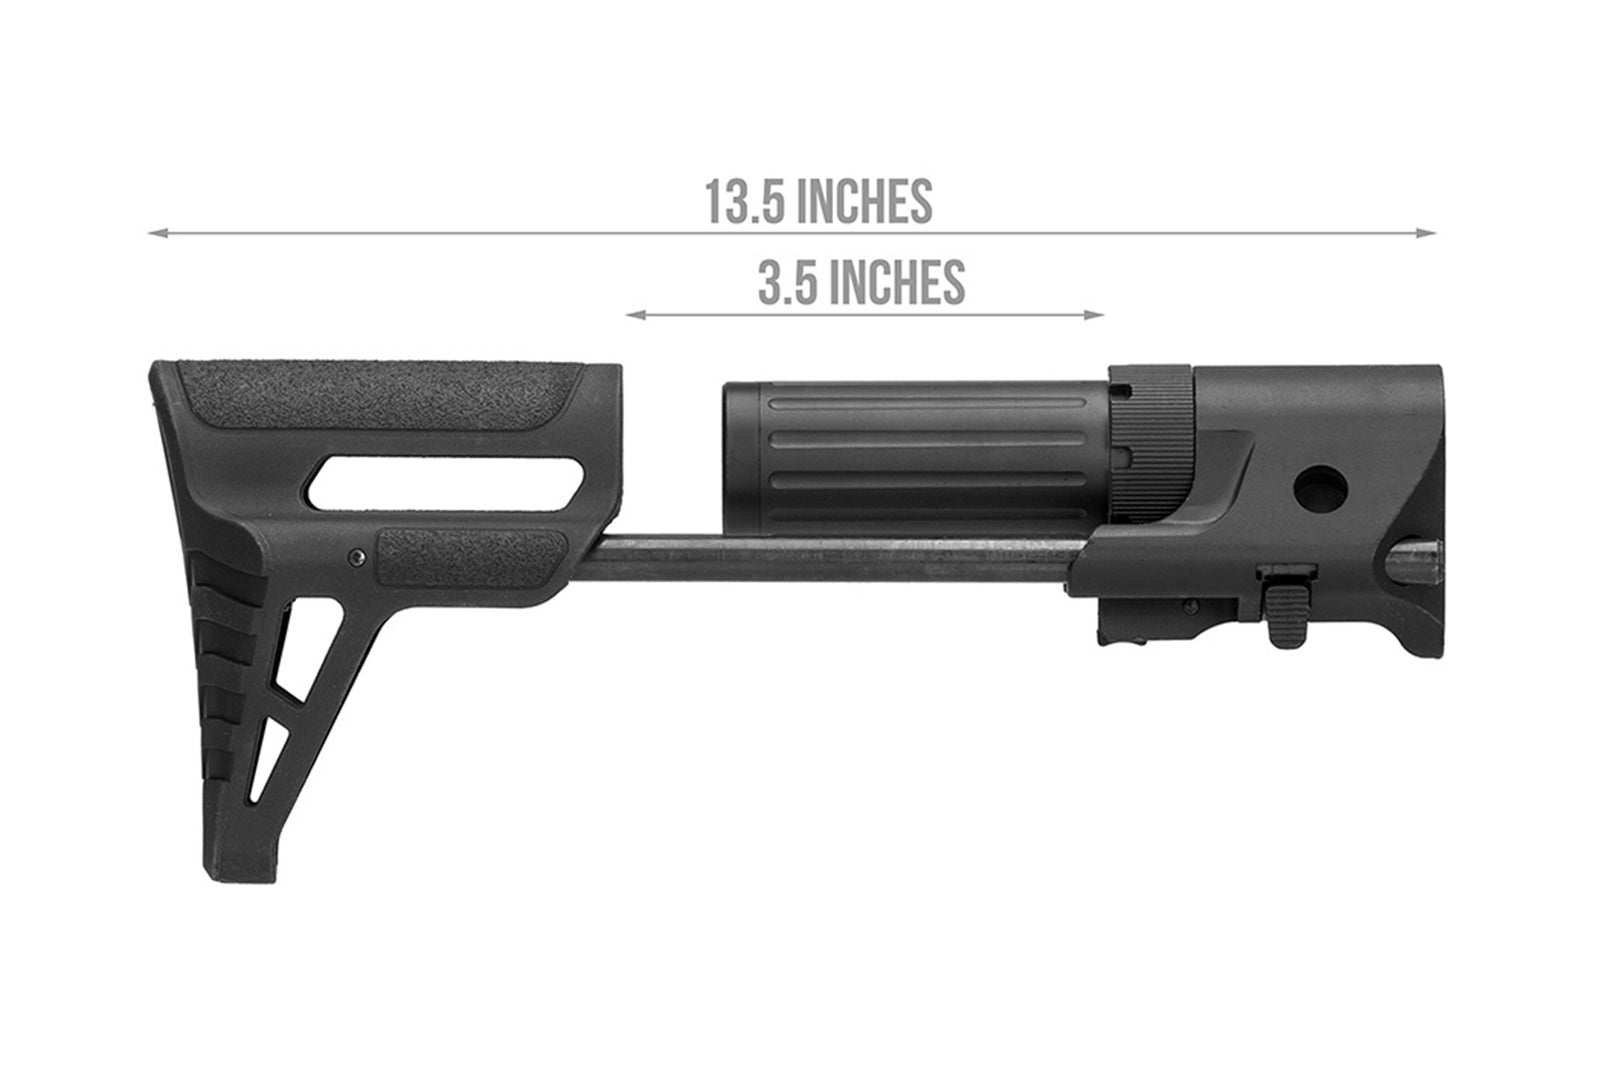 Lancer Tactical AEG Retractable PDW Stock